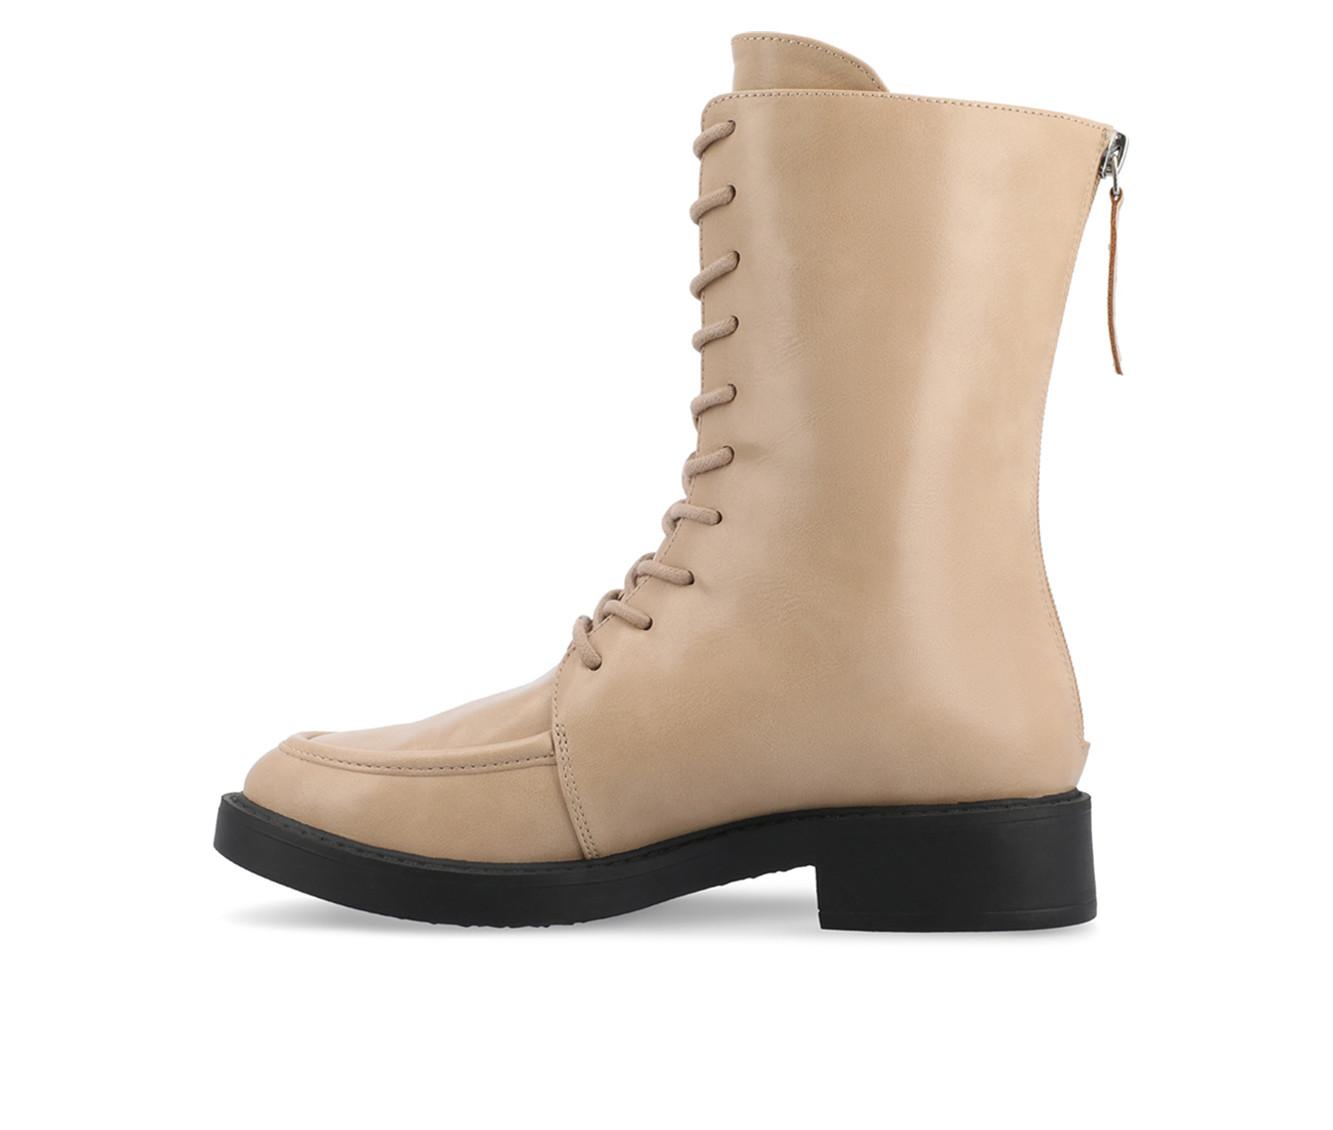 Women's Journee Collection Nikks Lace Up Boots